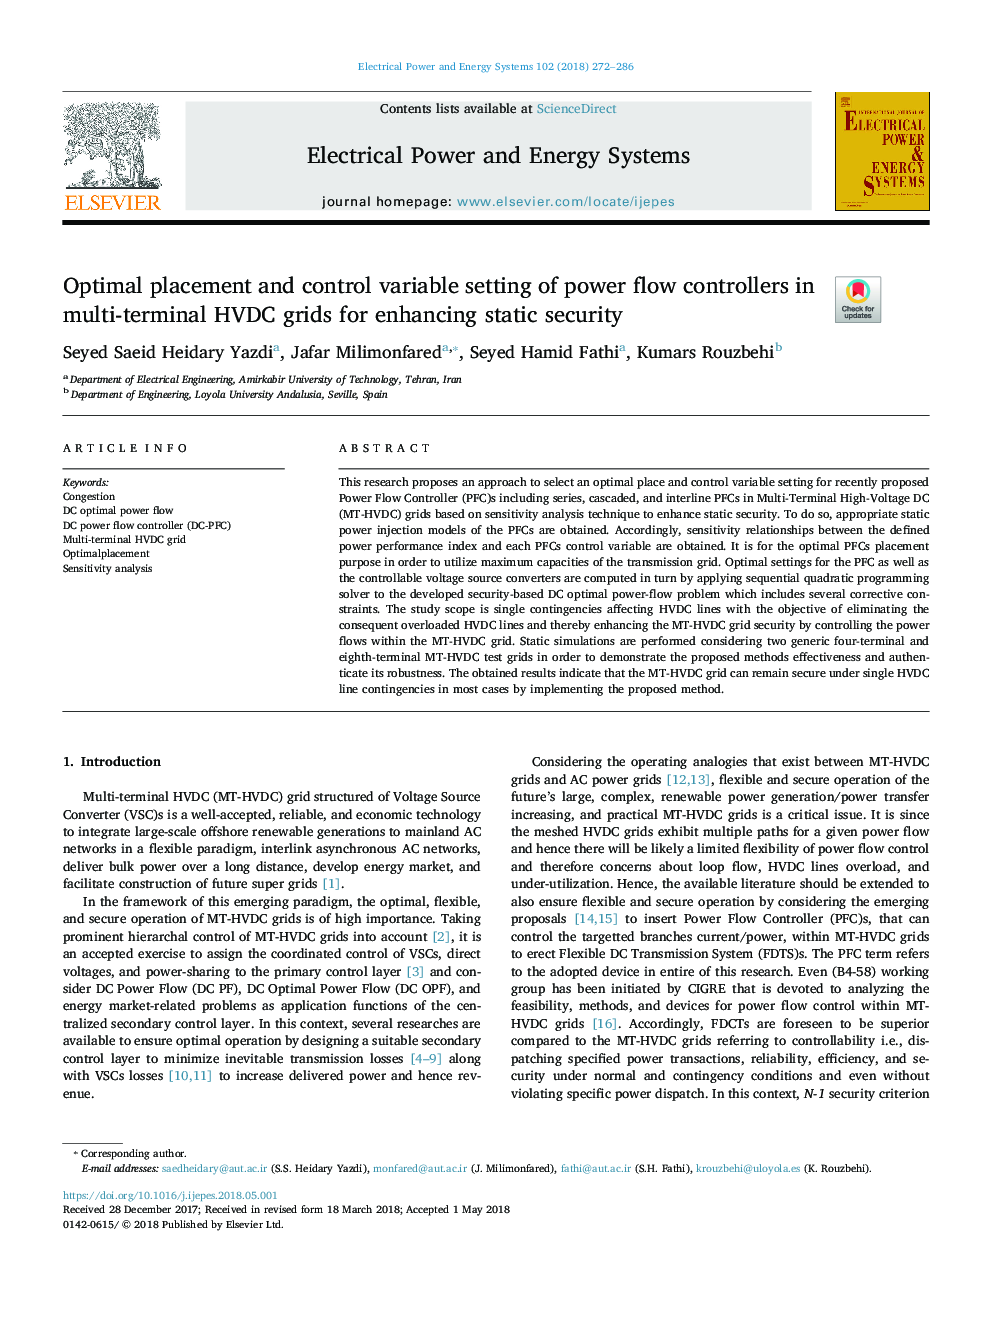 Optimal placement and control variable setting of power flow controllers in multi-terminal HVDC grids for enhancing static security